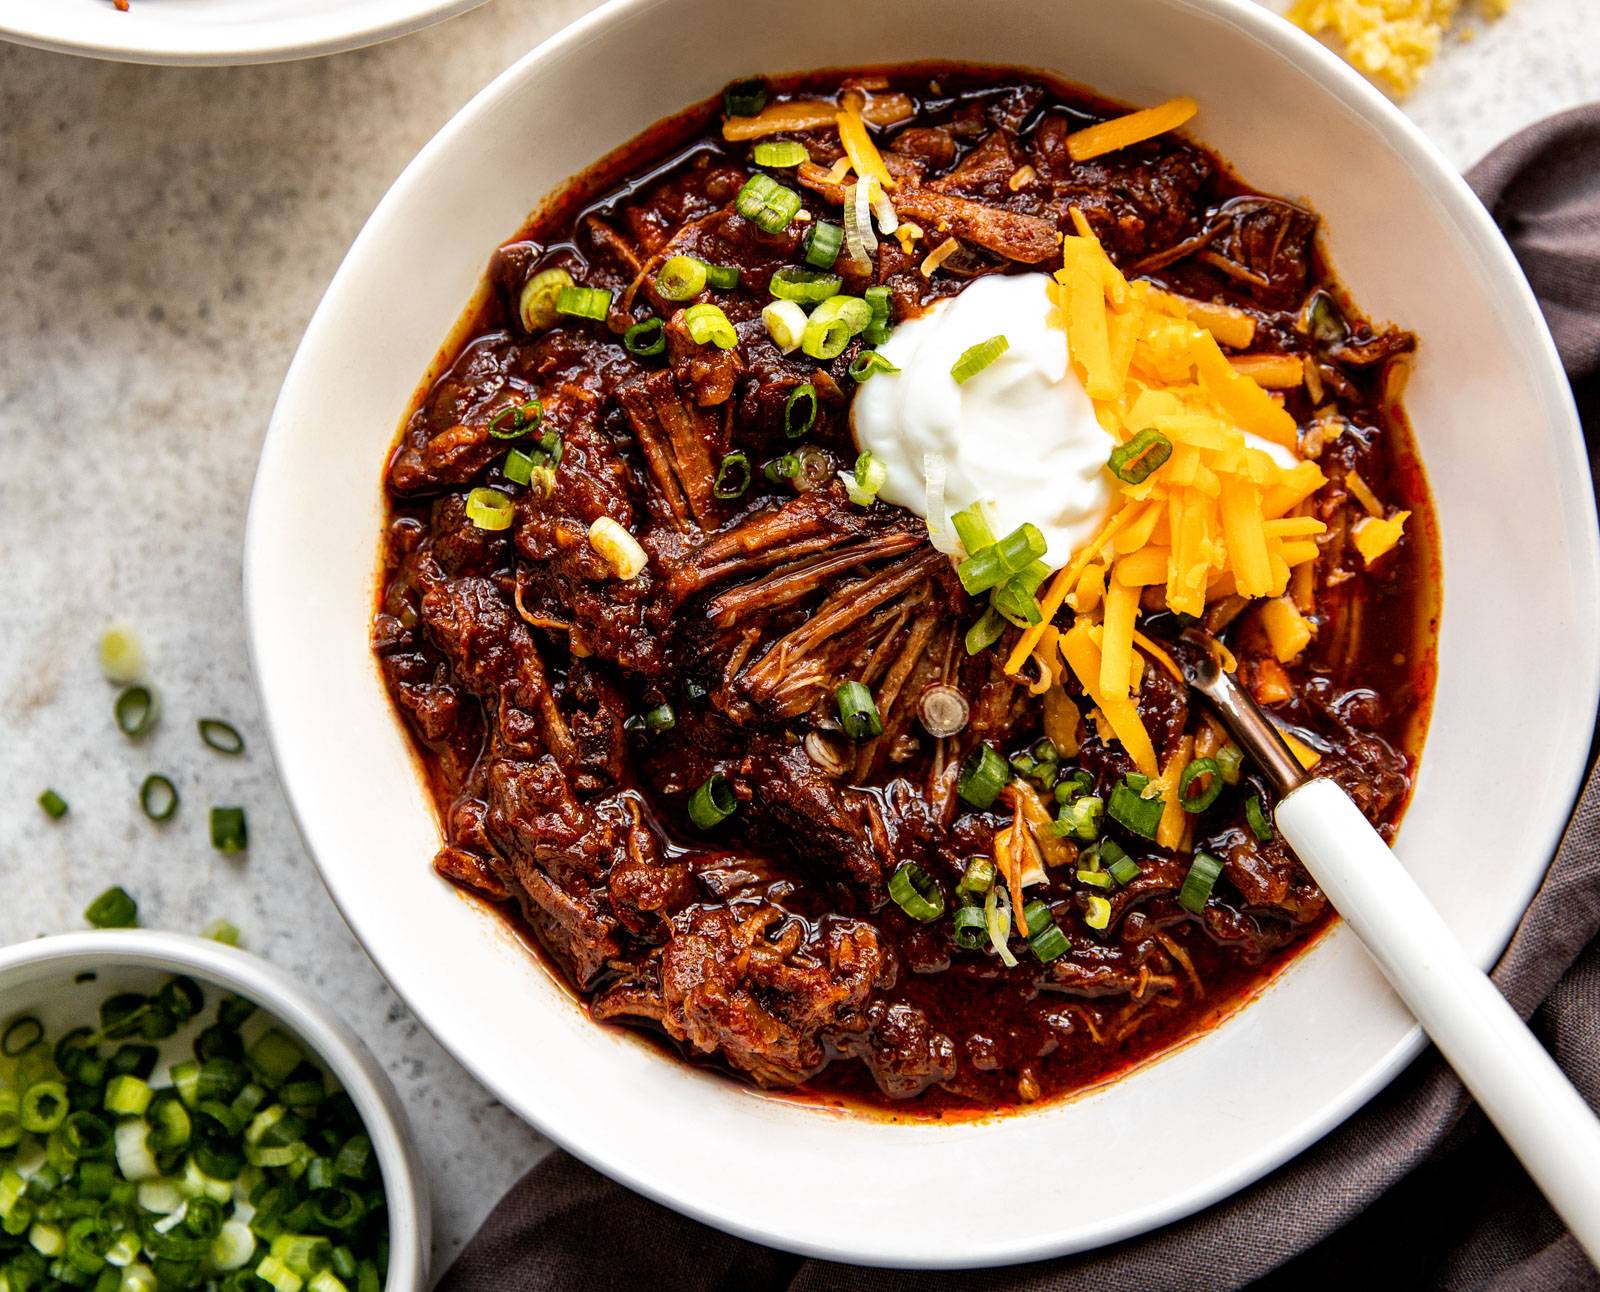 A bowl of Texas chili with sour cream, cheese, and green onions.